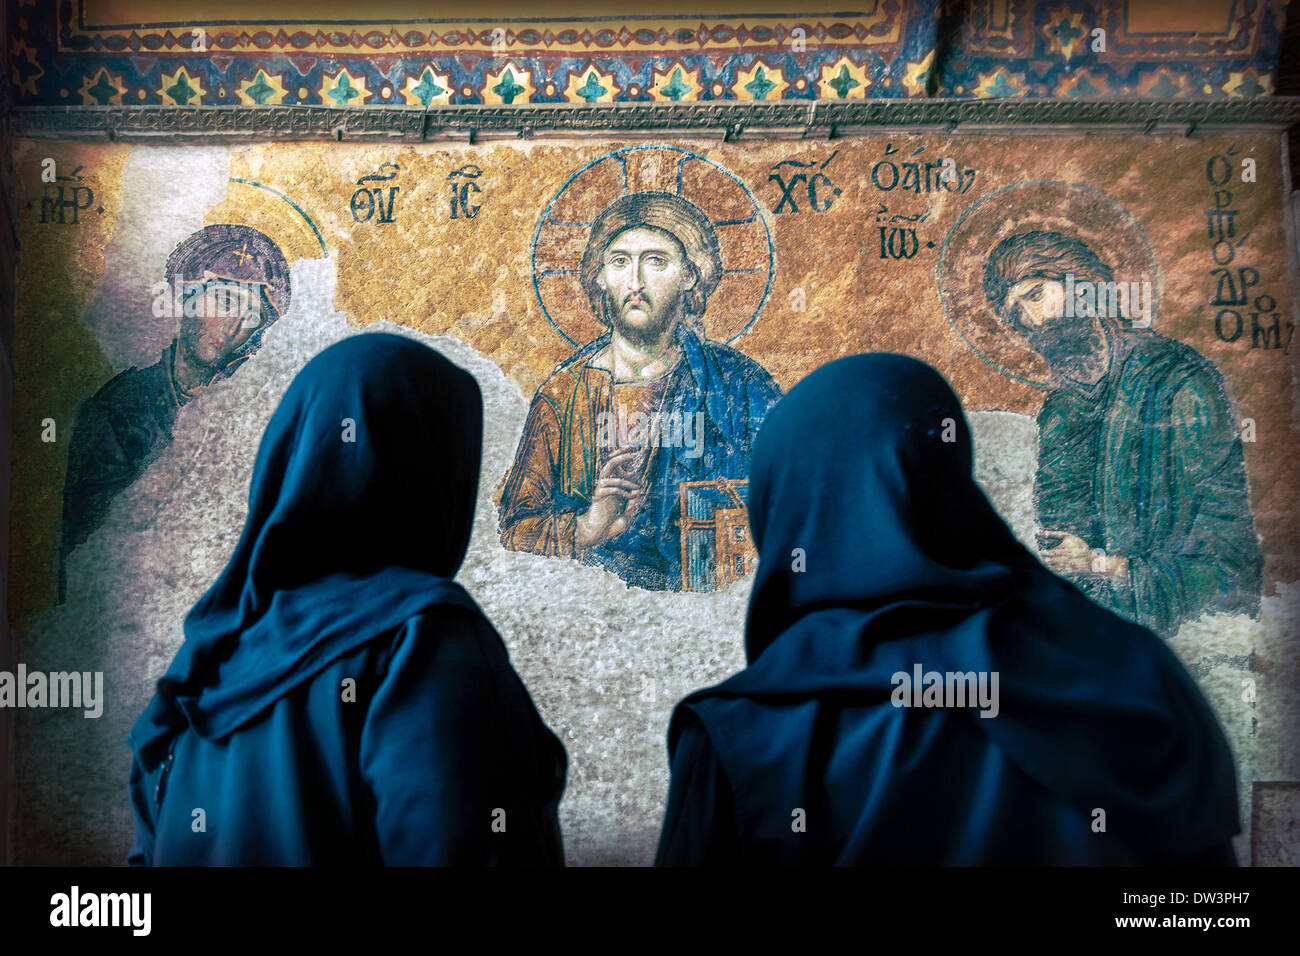 Women looking at Christ image in Hagia Sophia in Istanbul Turkey. Stock Photo